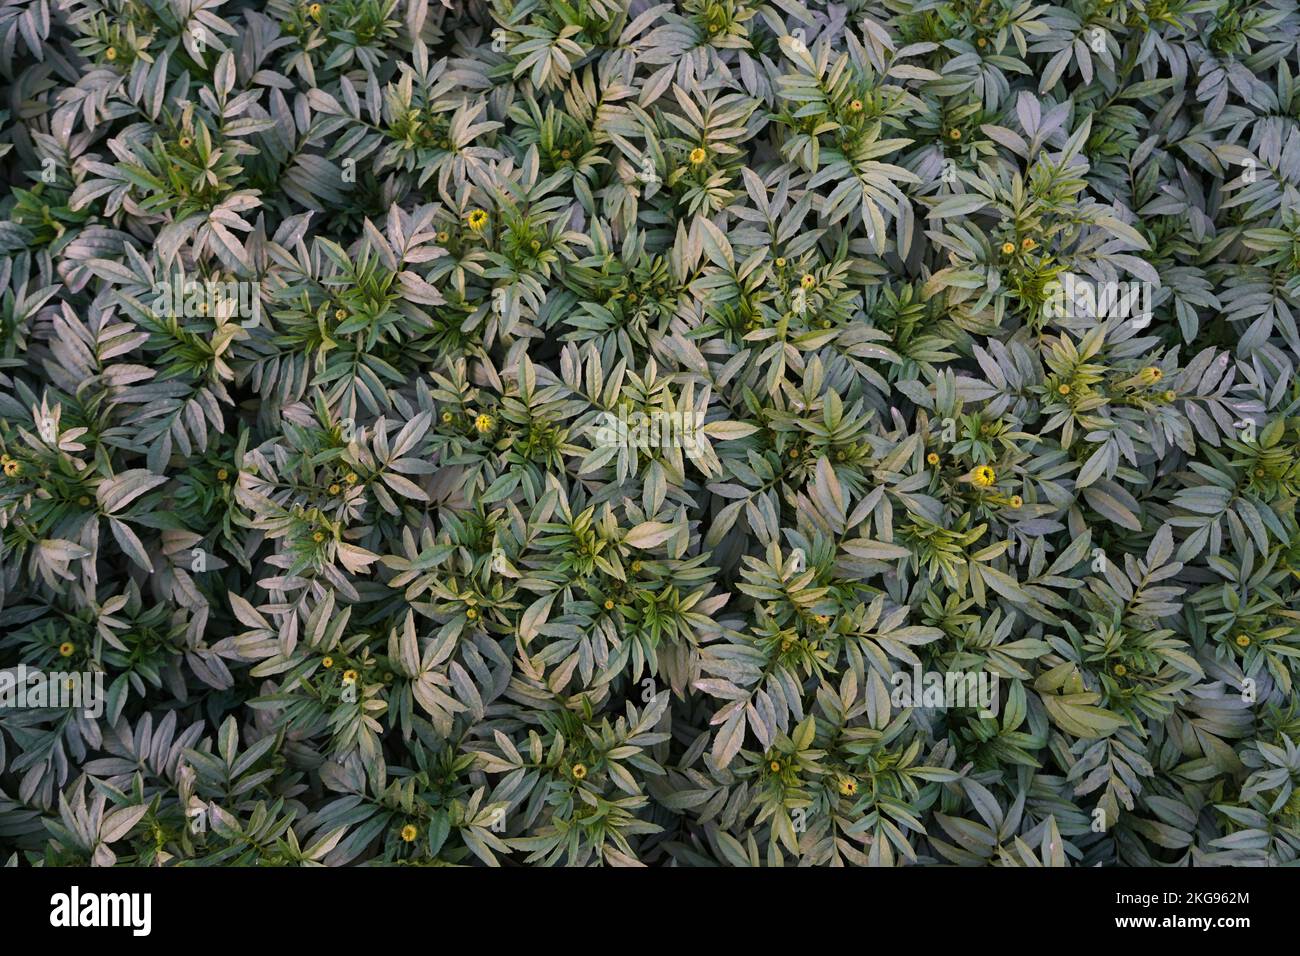 selective focusing marigold plant leaves, without flowers, a solid motley green background, beautiful neat leaves, wallpaper Stock Photo